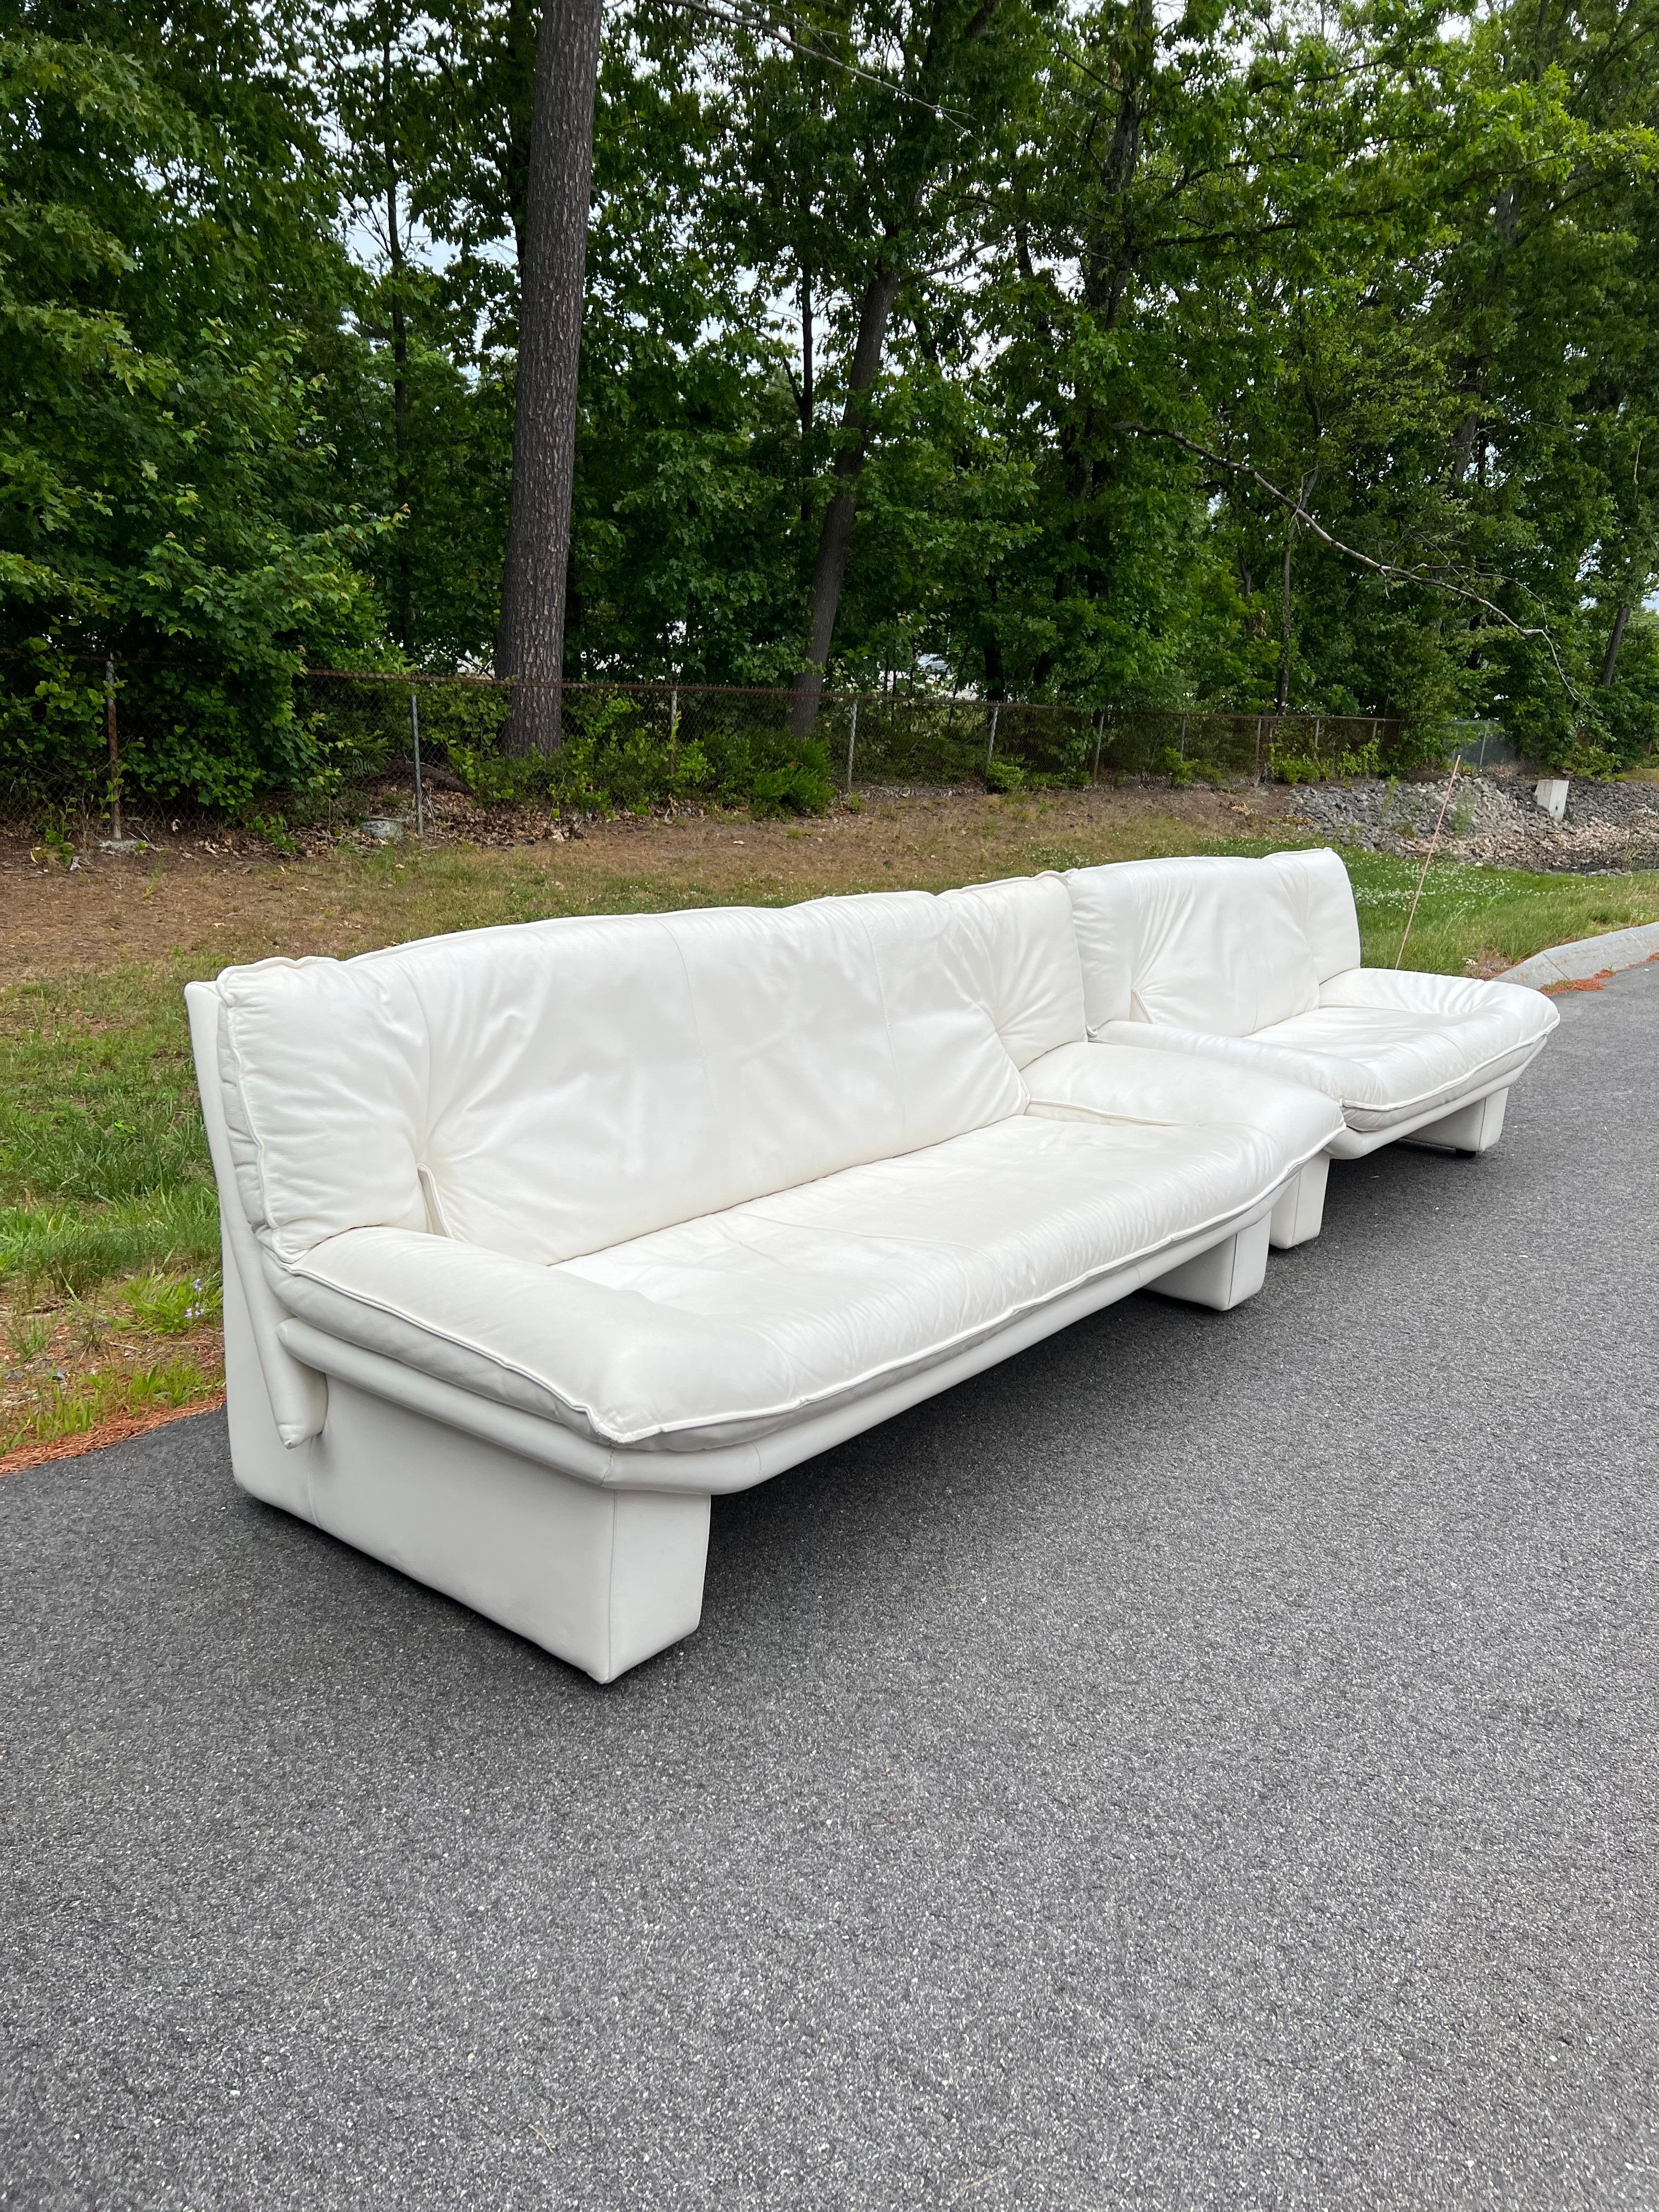 Set of 2 post-modern Italian white leather sofas designed by Nicoletti Salotti. The soft white leather is in good condition overall - some even scuffing/scratching throughout. Some areas are a little more worn/darkened from age and use (see up close